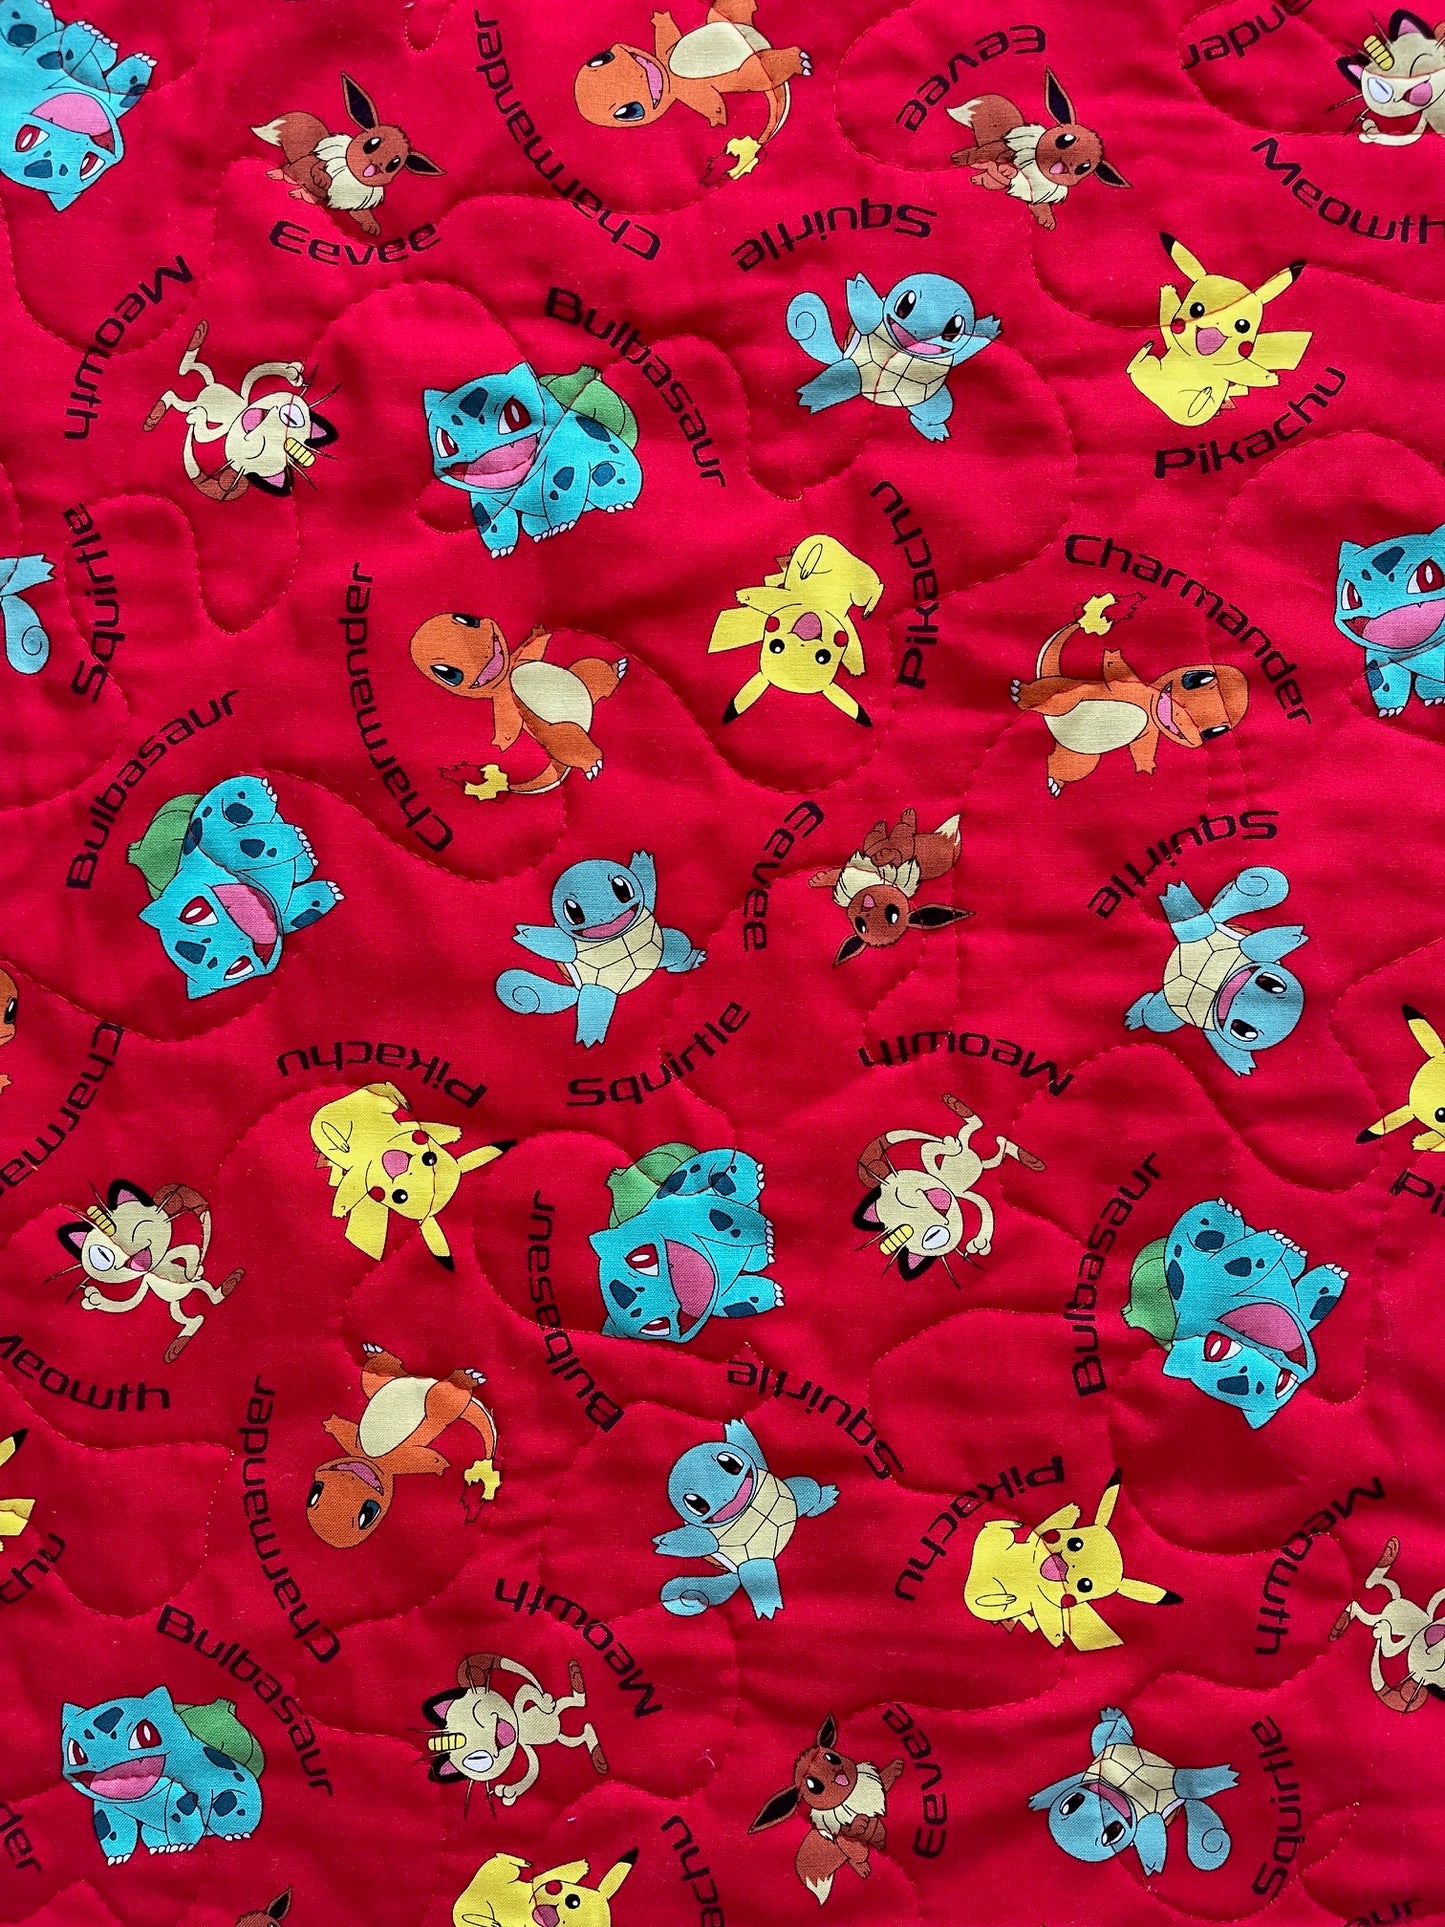 POKEMON VIDEO GAME ANIME Inspired PIKACHU, BULBASAUR, SQUIRTLE, MEOWTH, EAVEE & CHARMANDER RED INSPIRED QUILTED BLANKET